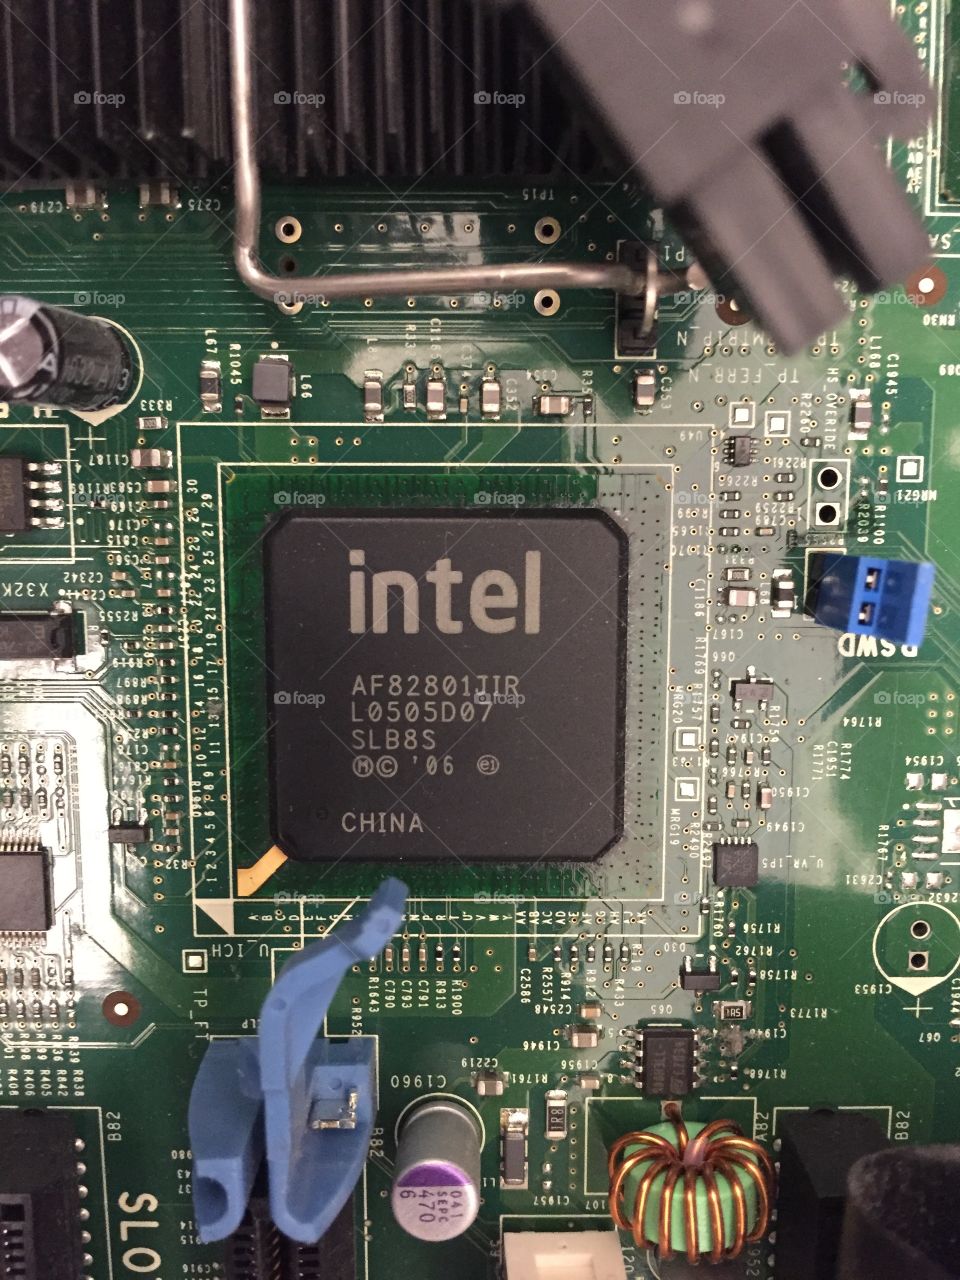 Intel chip on a motherboard.